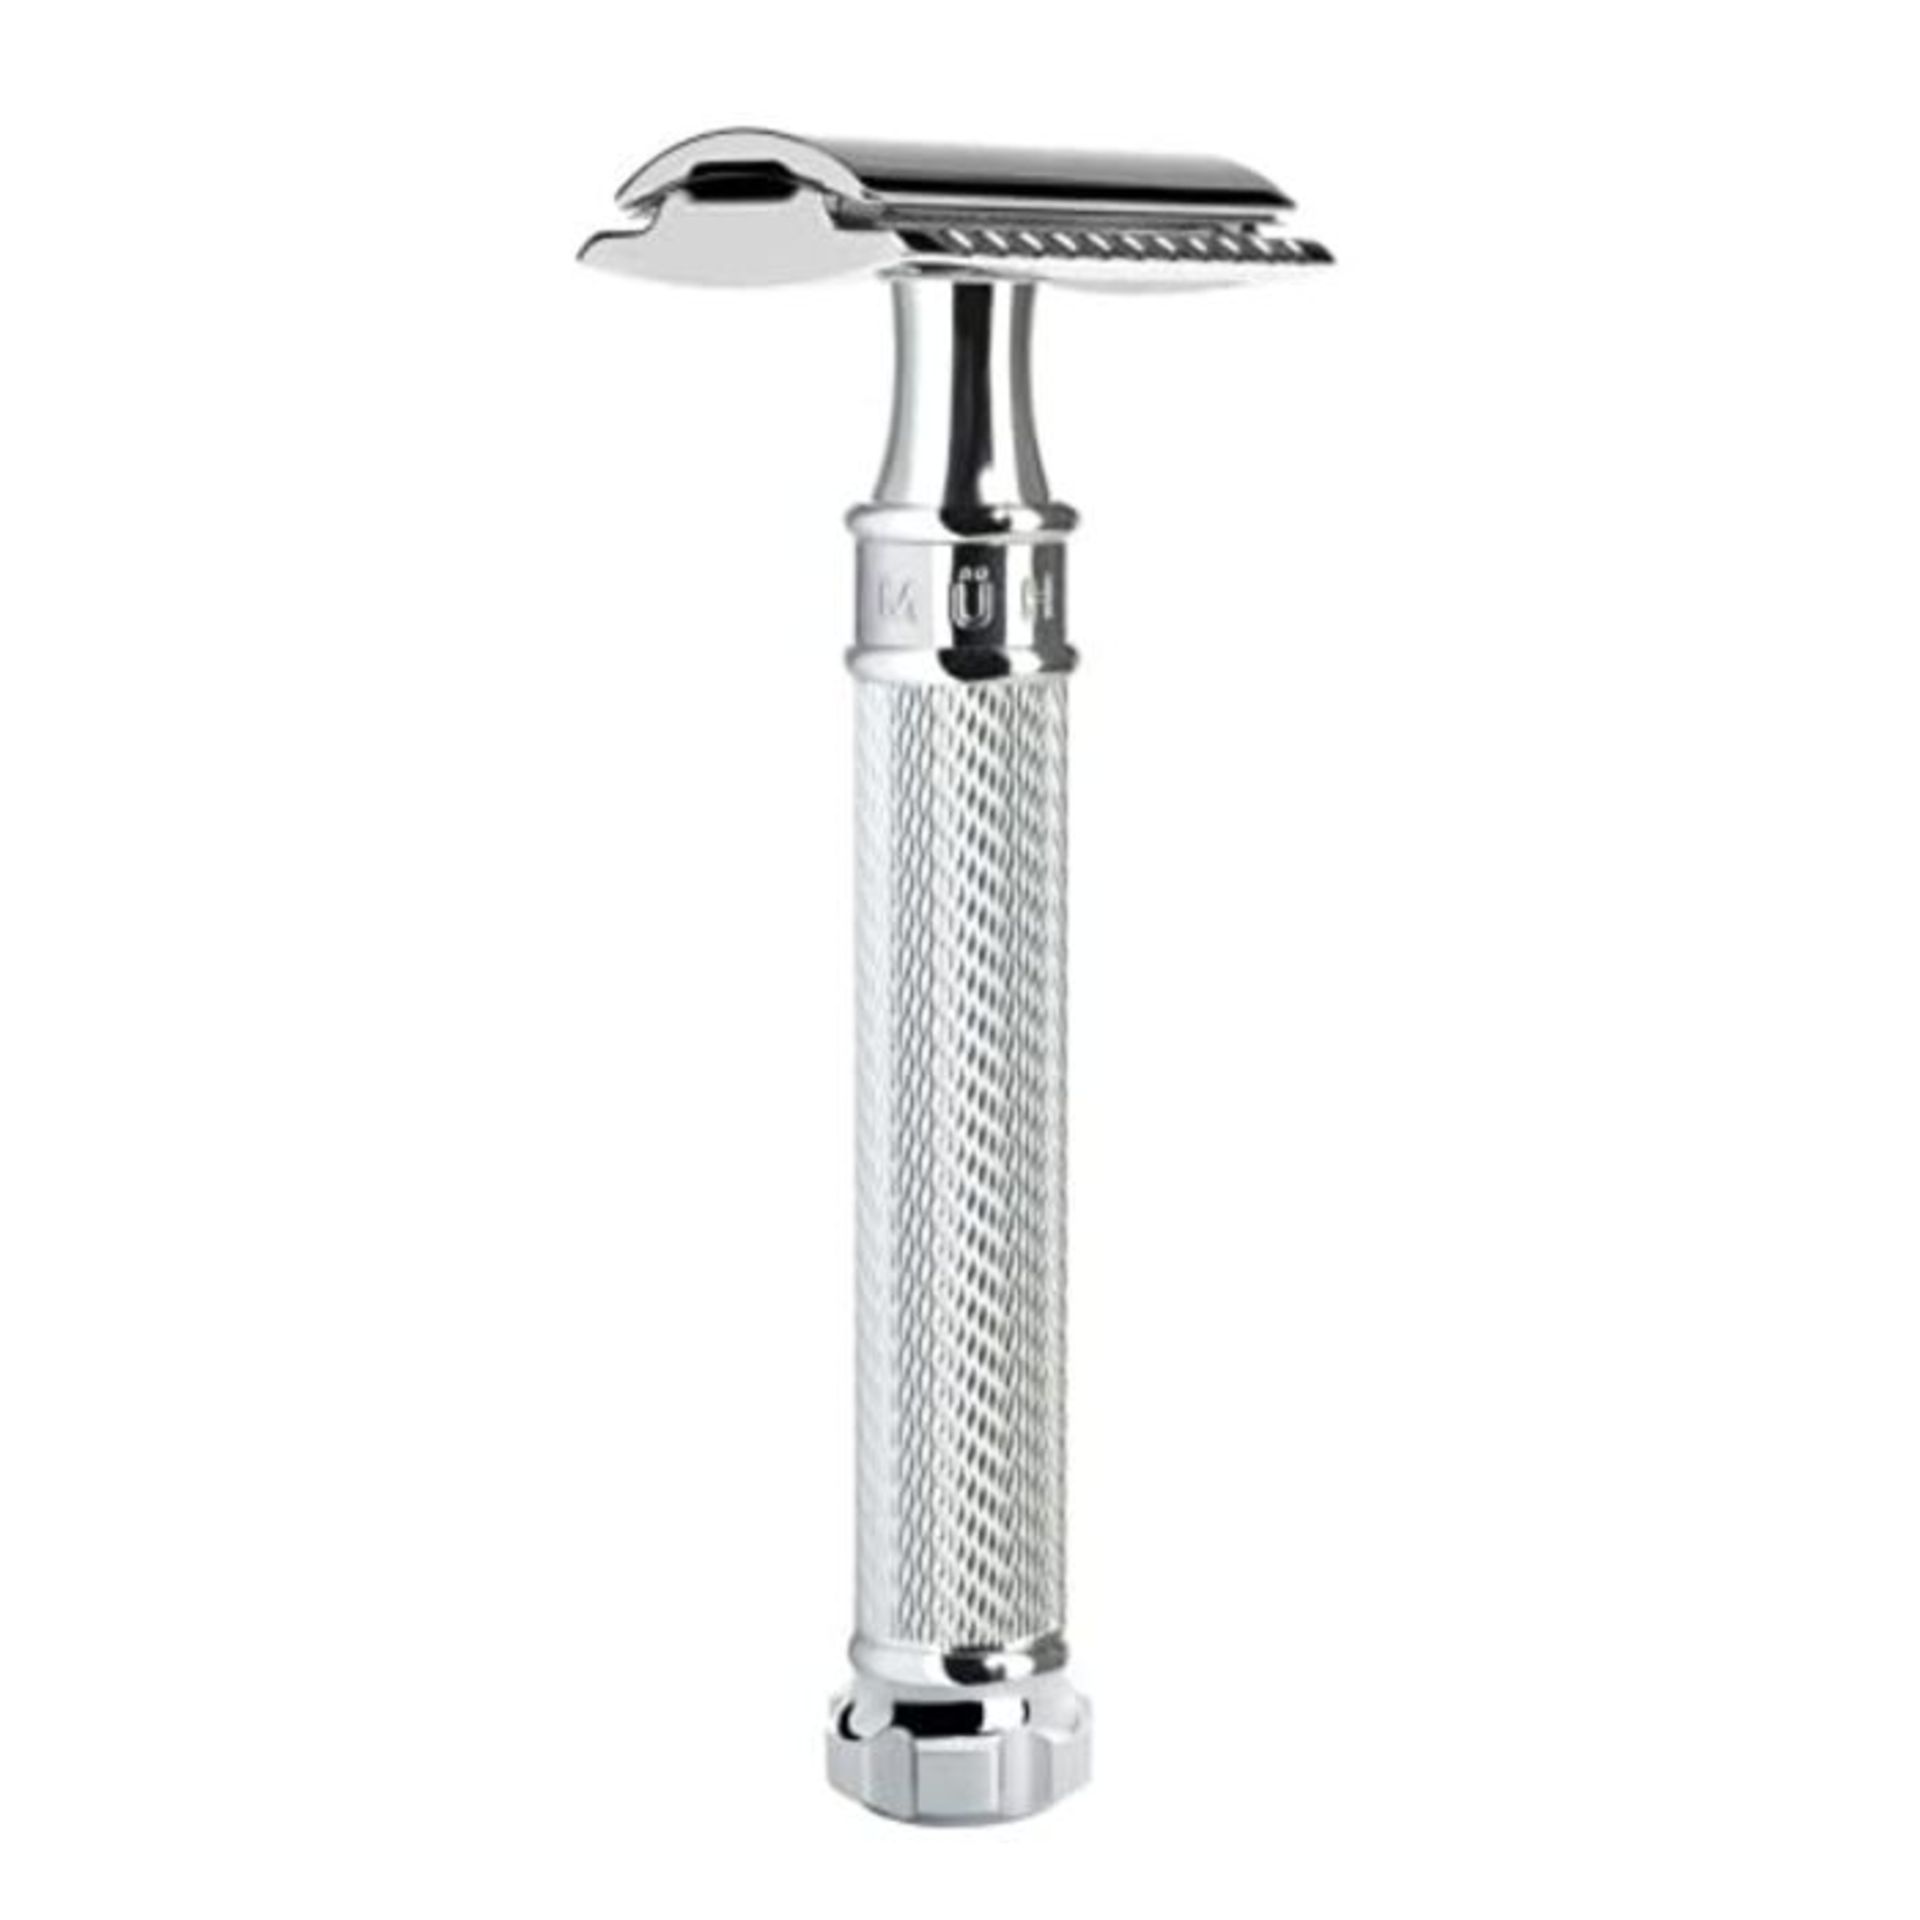 MÜHLE Traditional Chrome 'Twist' Safety Razor (Closed Comb) No Blades Included (R89TW